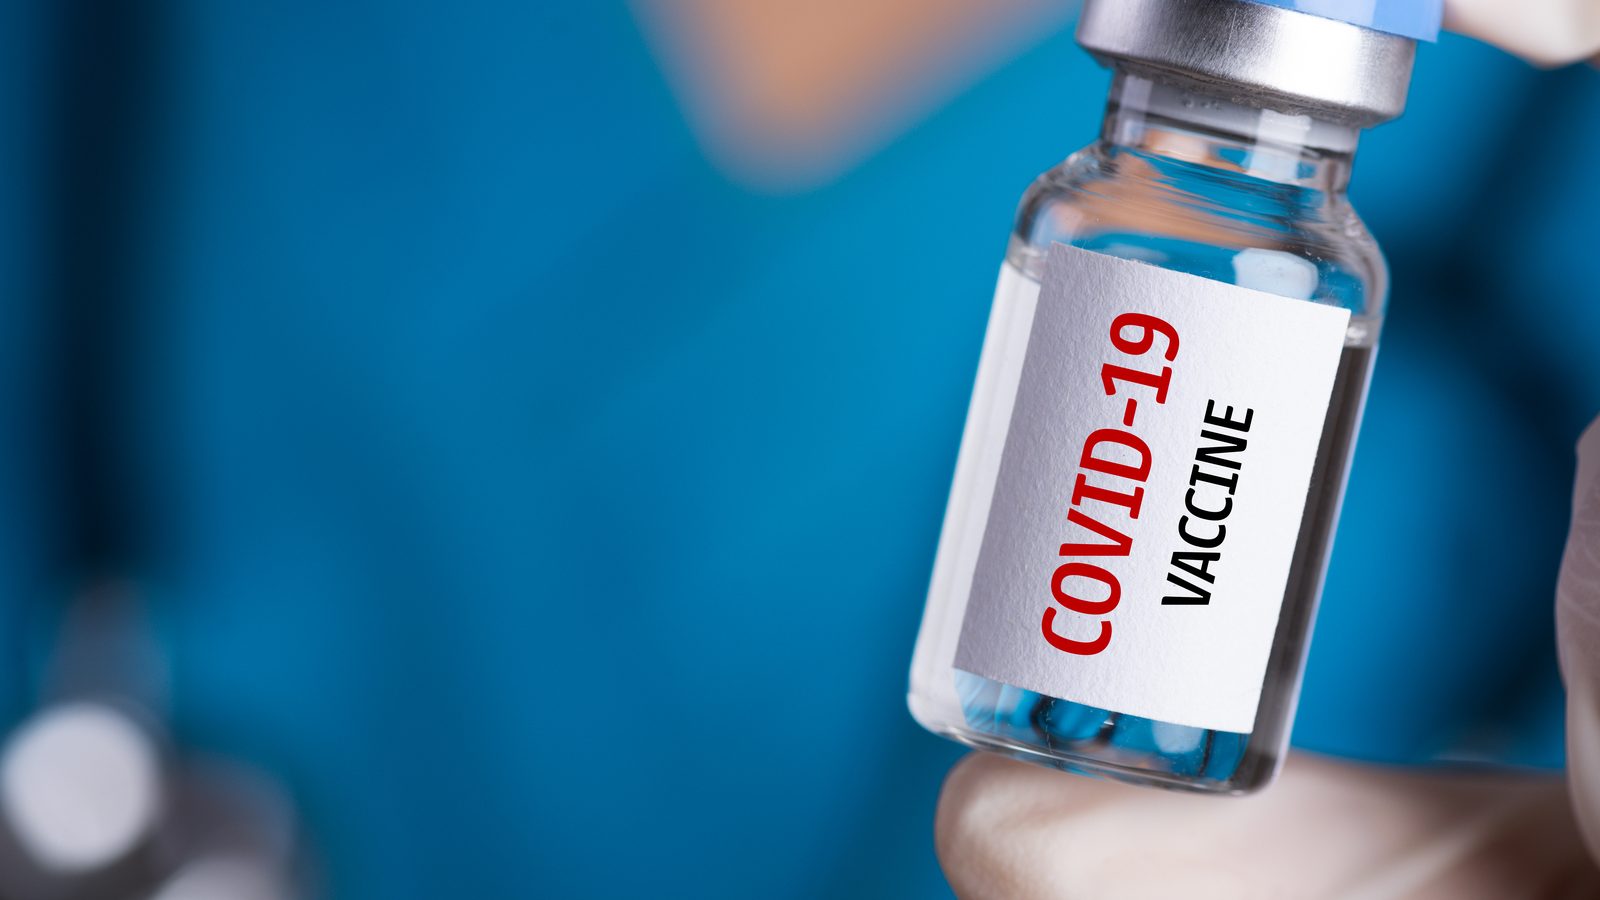 Know about India's Covid 19 vaccines Covishield and Covaxin